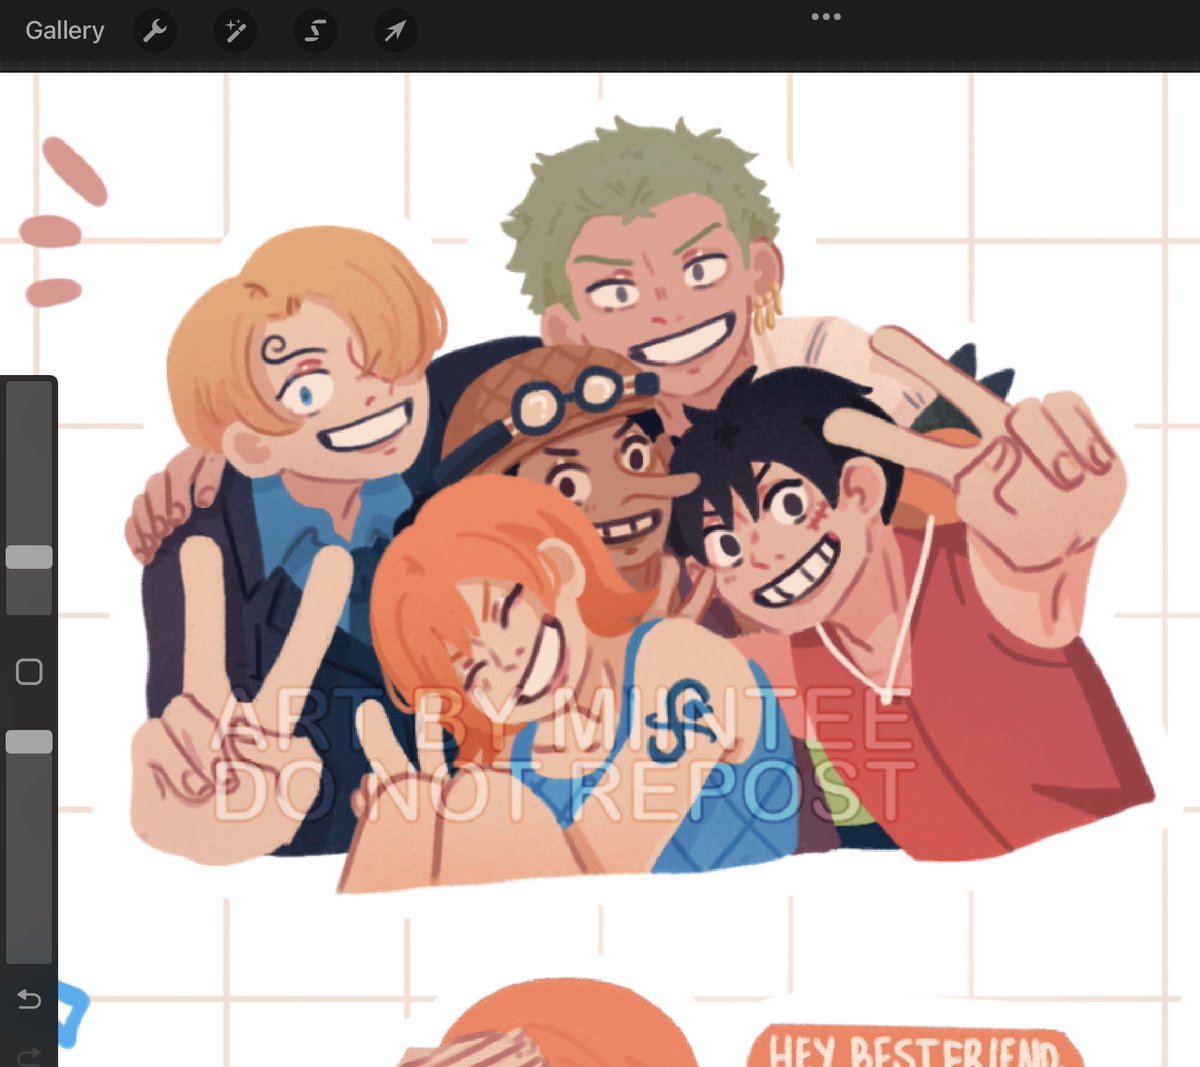 is it really a miintee sticker sheet if theyre not at least huddling together